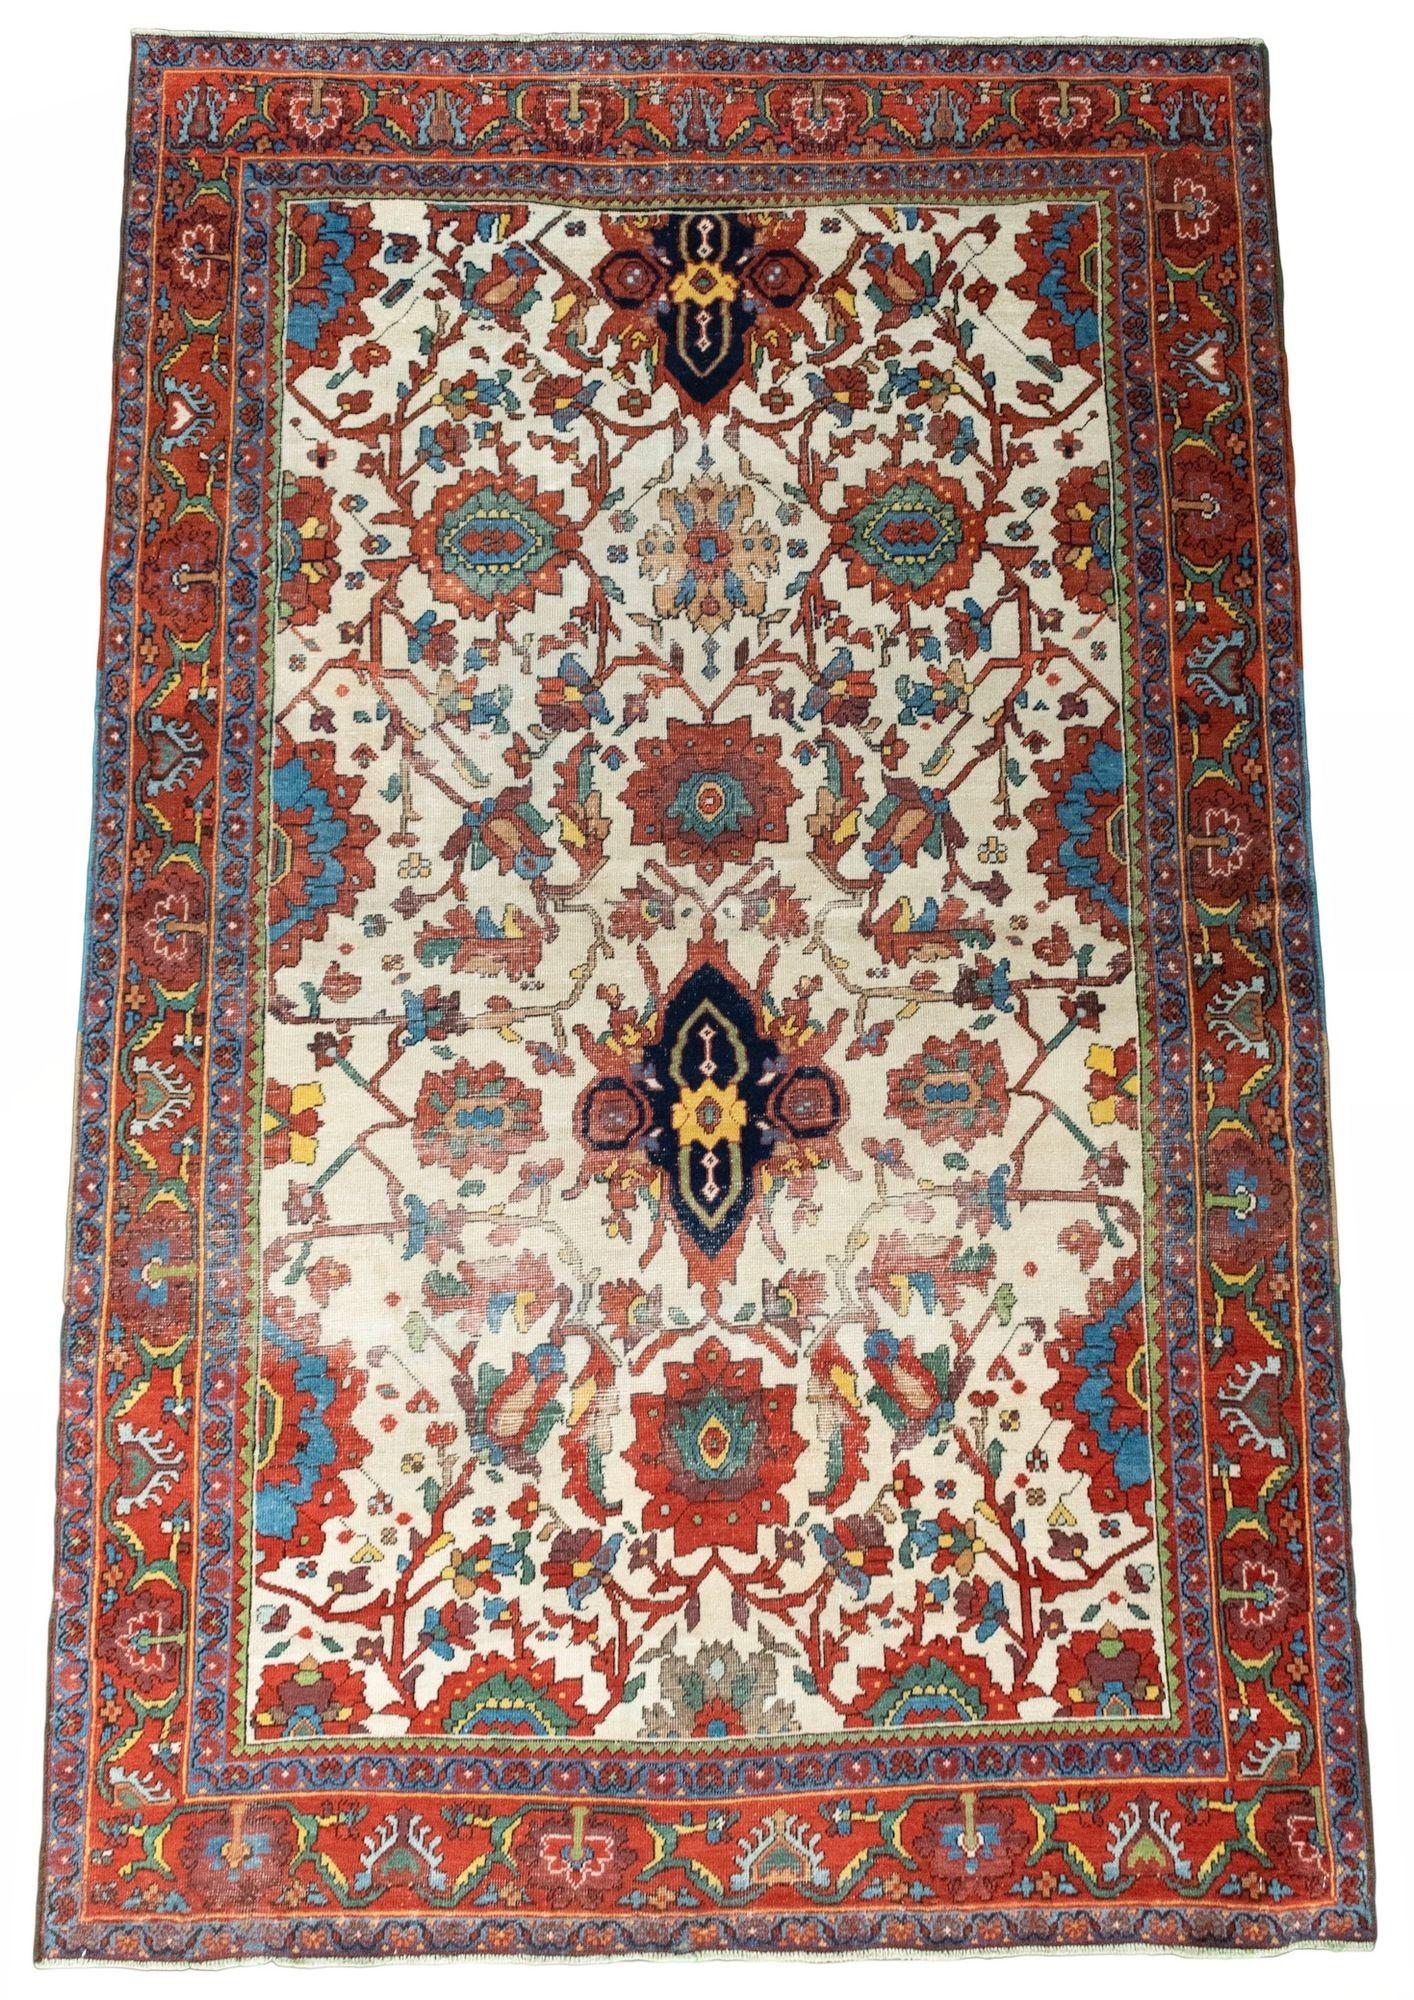 A stunning antique Ferahan rug, hand woven circa 1880 with a stylised floral design on a rare ivory field and terracotta border. A bit of wear but I fell in love with those awesome vegetable dyes.
Size: 1.97m x 1.24m (6ft 6in x 4ft 1in)
This rug has